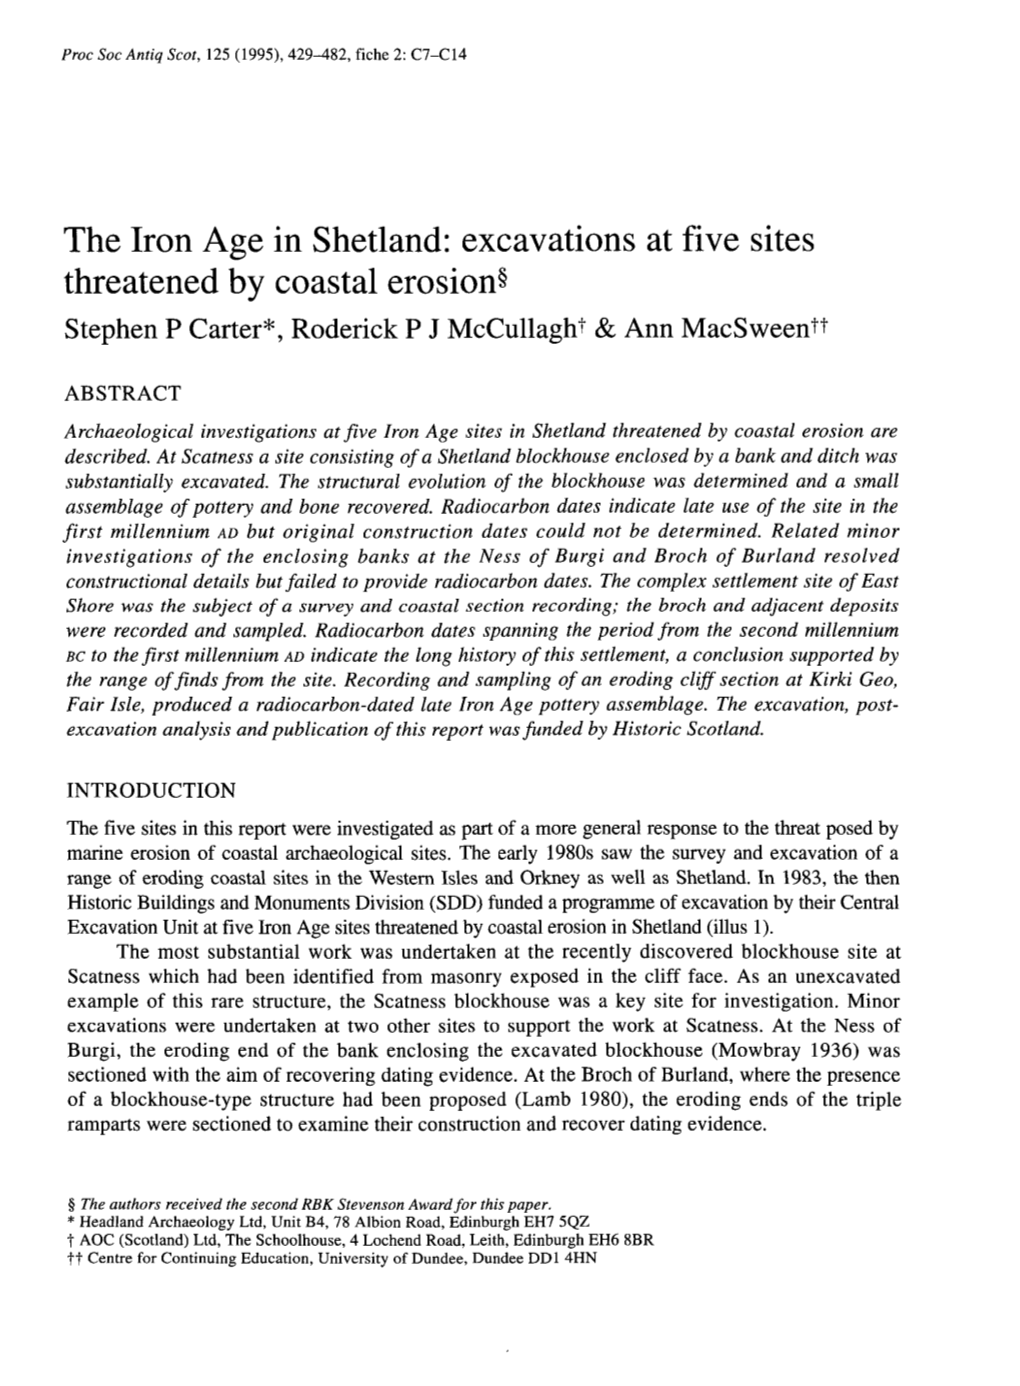 The Iron Age in Shetland 433